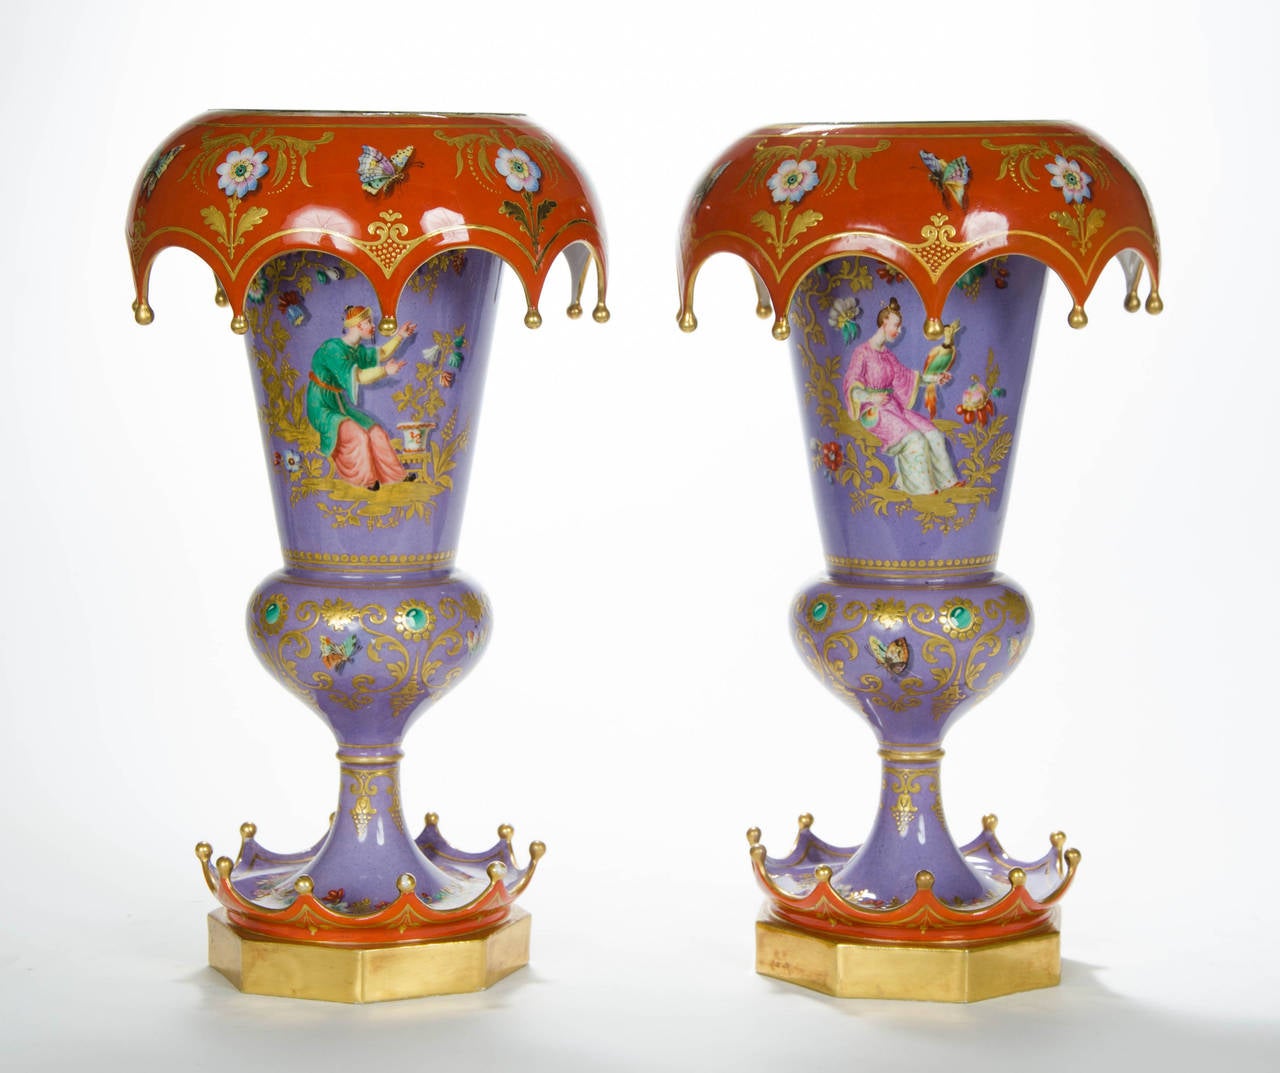 A rare and unusual pair of Chinoiserie vases in lavender and iron-red ground color, decorated with Chinoiserie figures, exotic birds, garlands of flowers, fruit and butterflies, French, circa 1840.